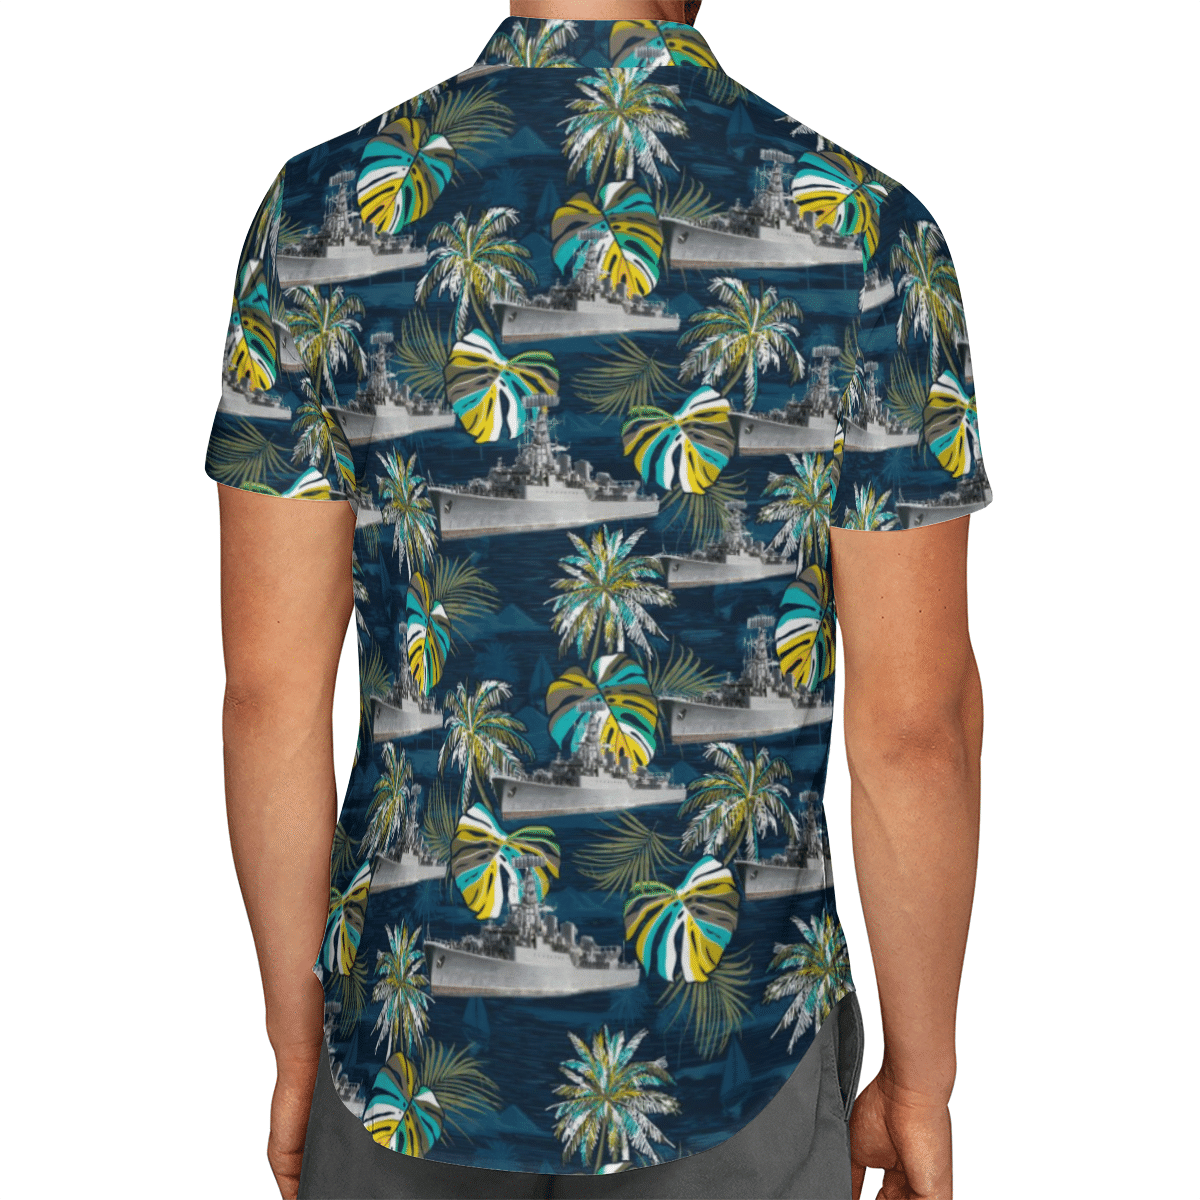 Going to the beach with a quality shirt 190